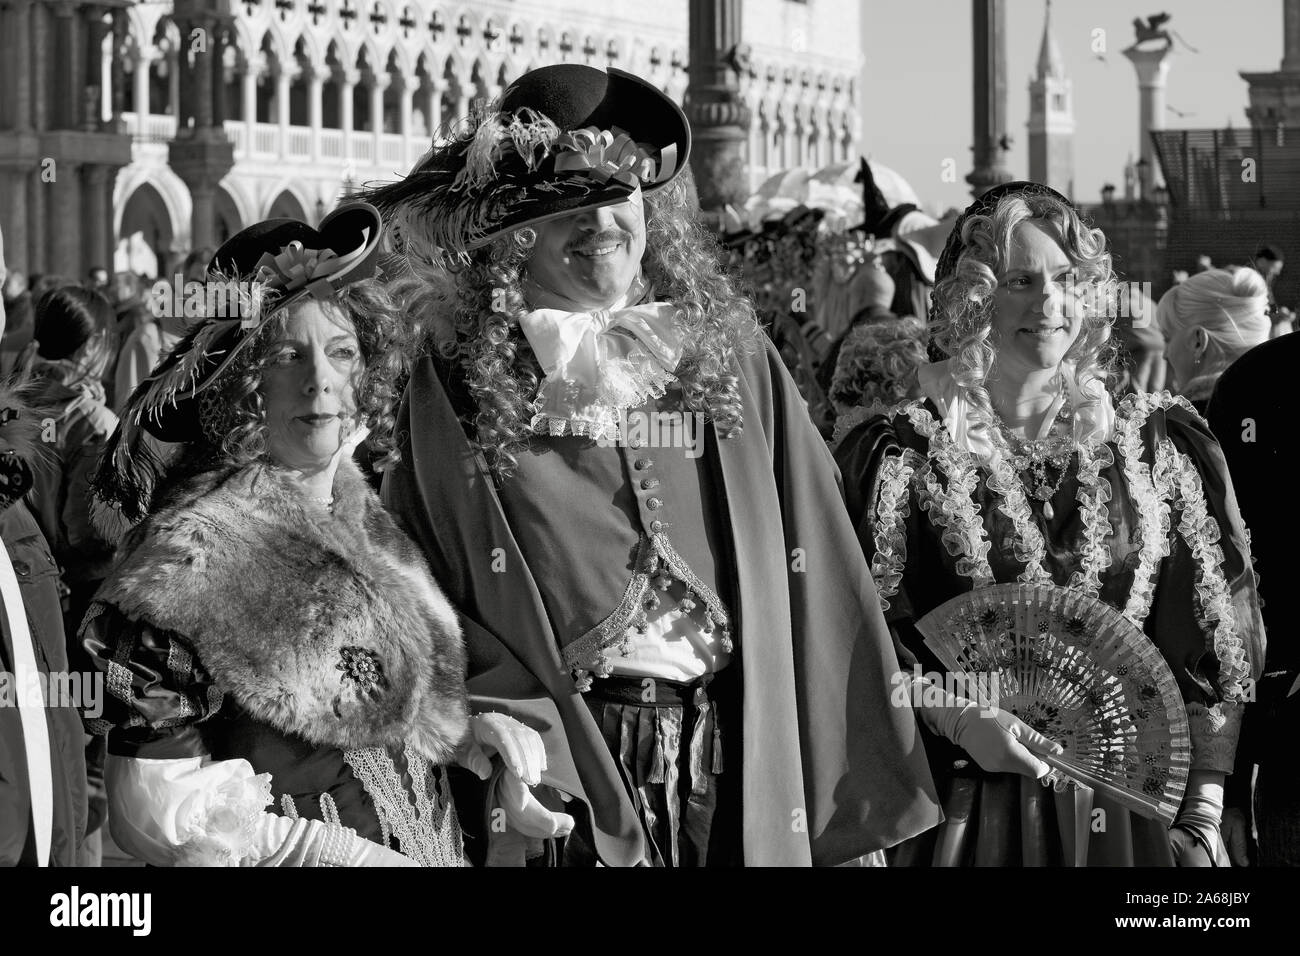 Piazza San Marco, Venice, Italy: three elegantly-costumed carnevale revellers in elaborate eighteenth century dress.  Black and white version Stock Photo